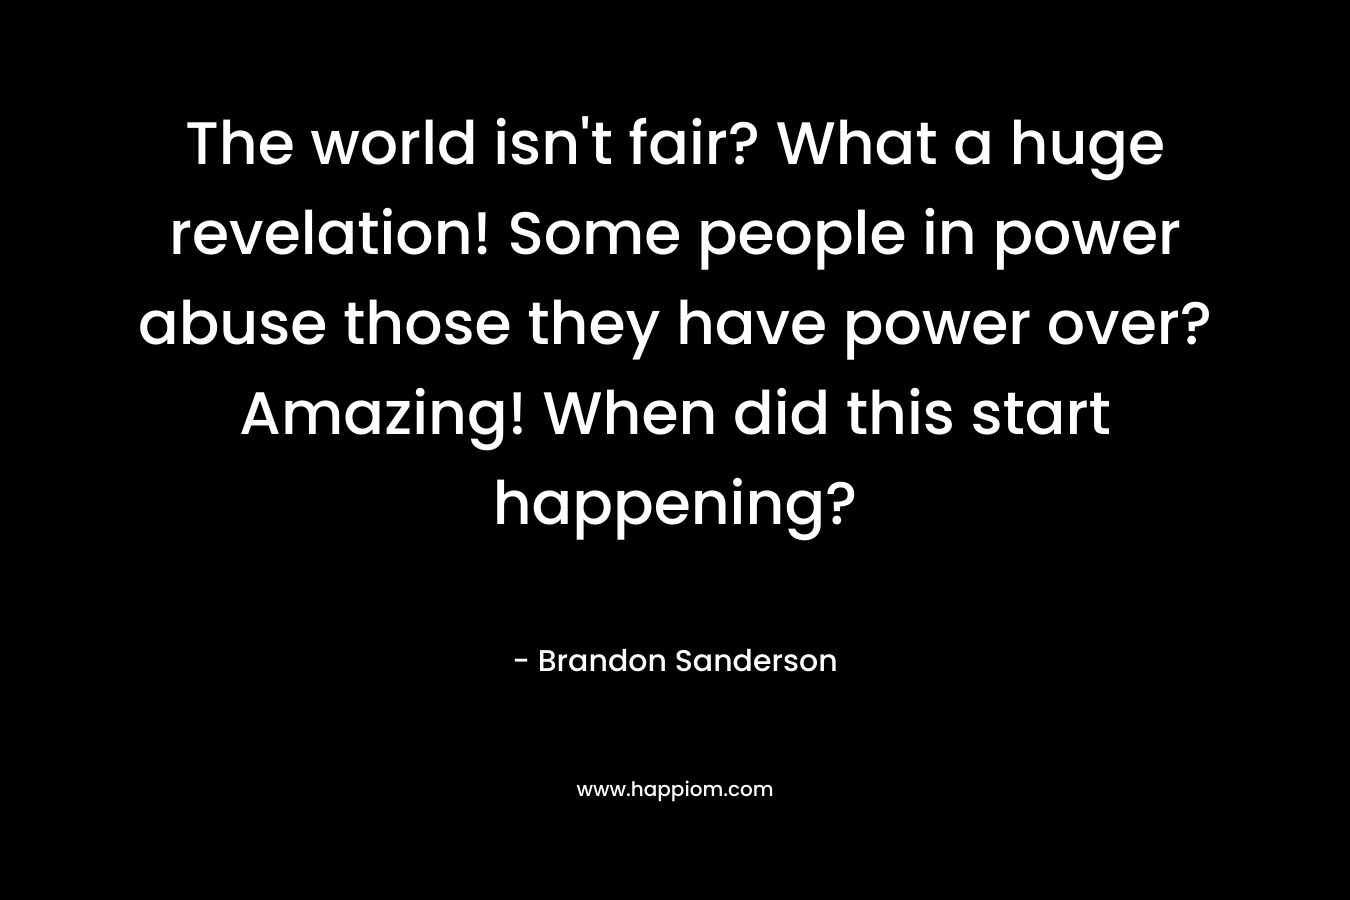 The world isn’t fair? What a huge revelation! Some people in power abuse those they have power over? Amazing! When did this start happening? – Brandon Sanderson